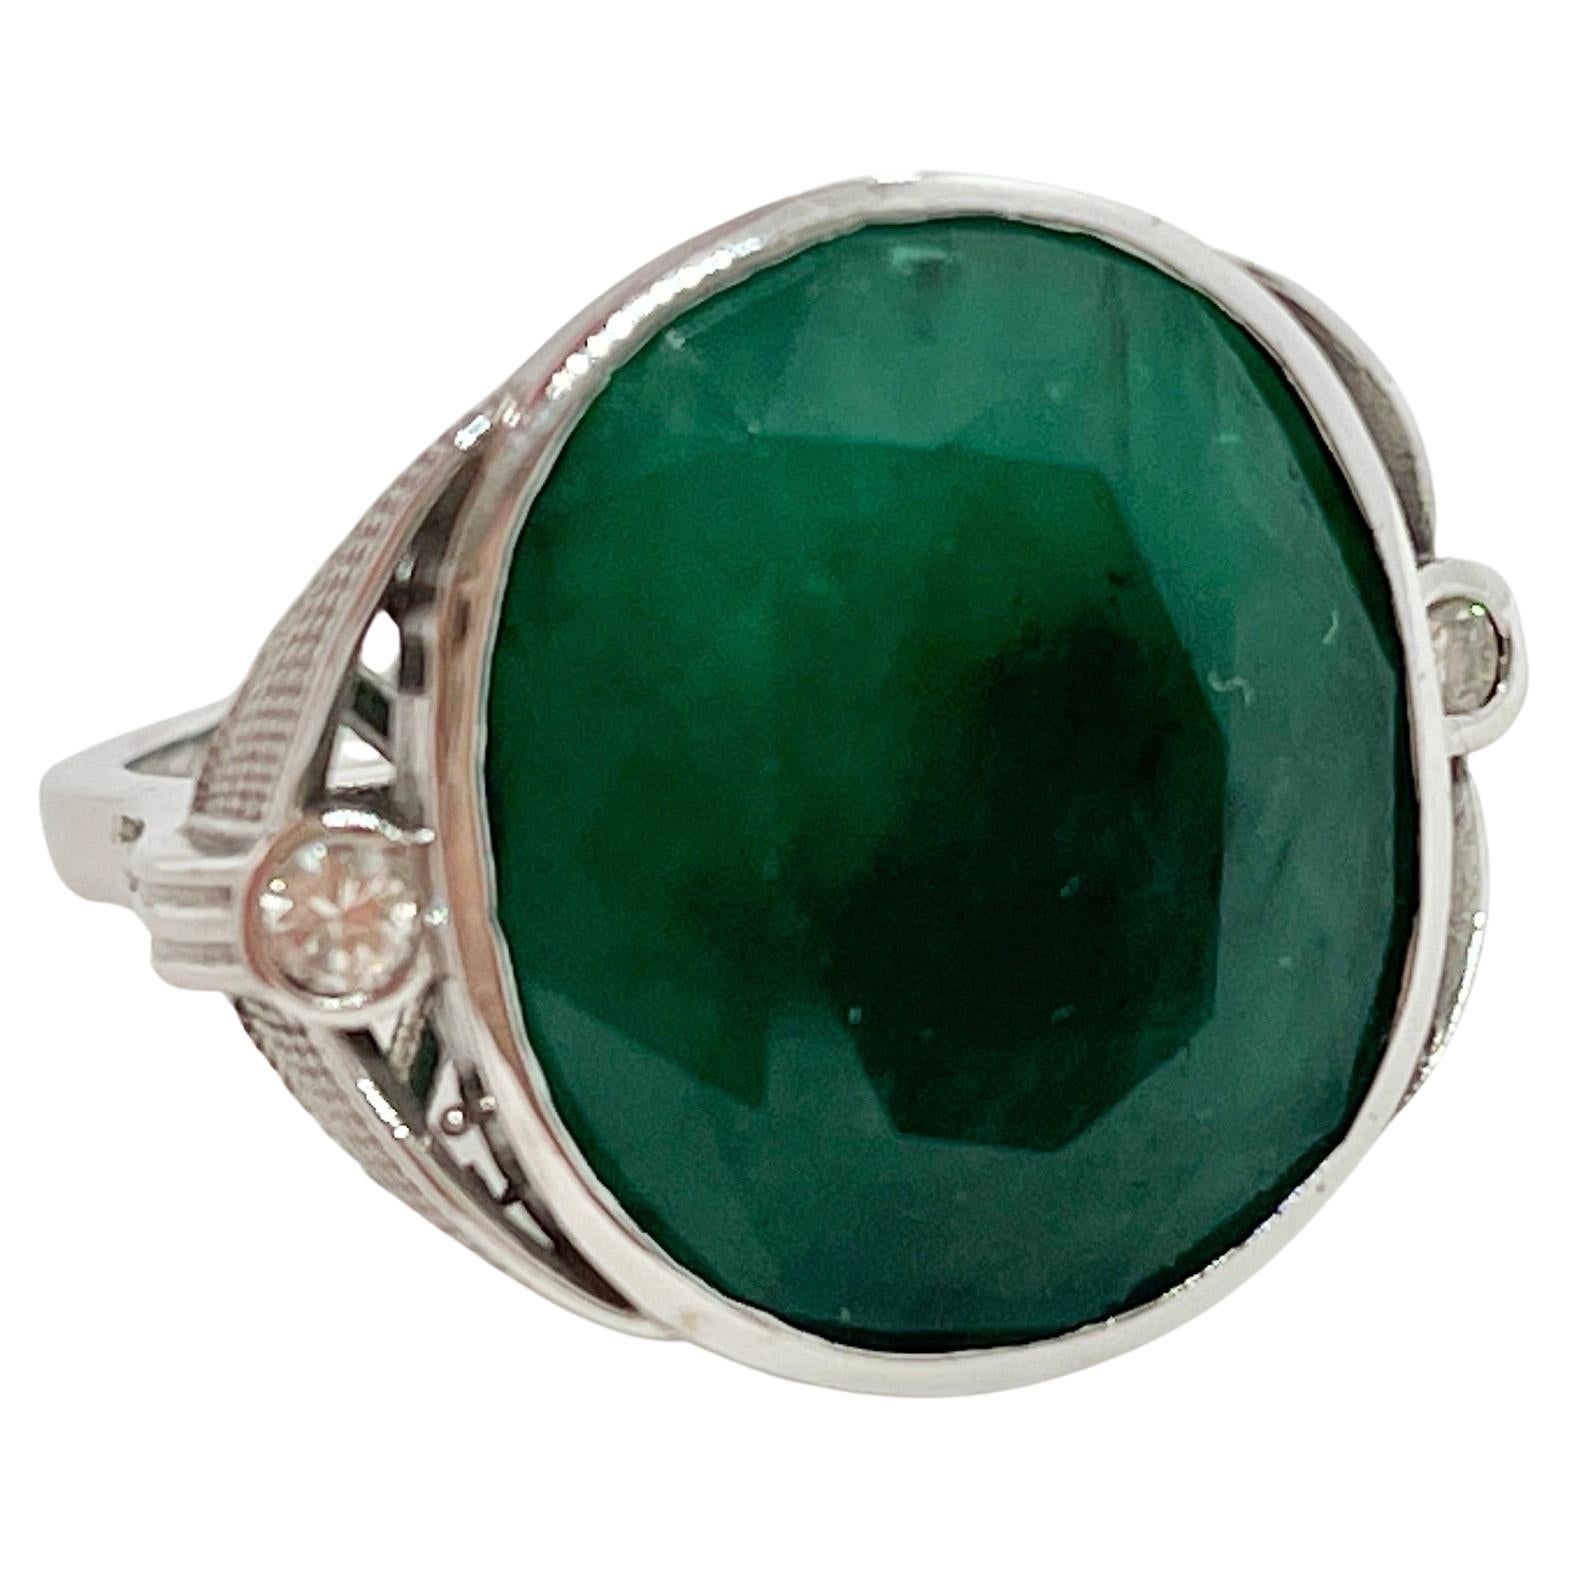 What does wearing an emerald ring mean?